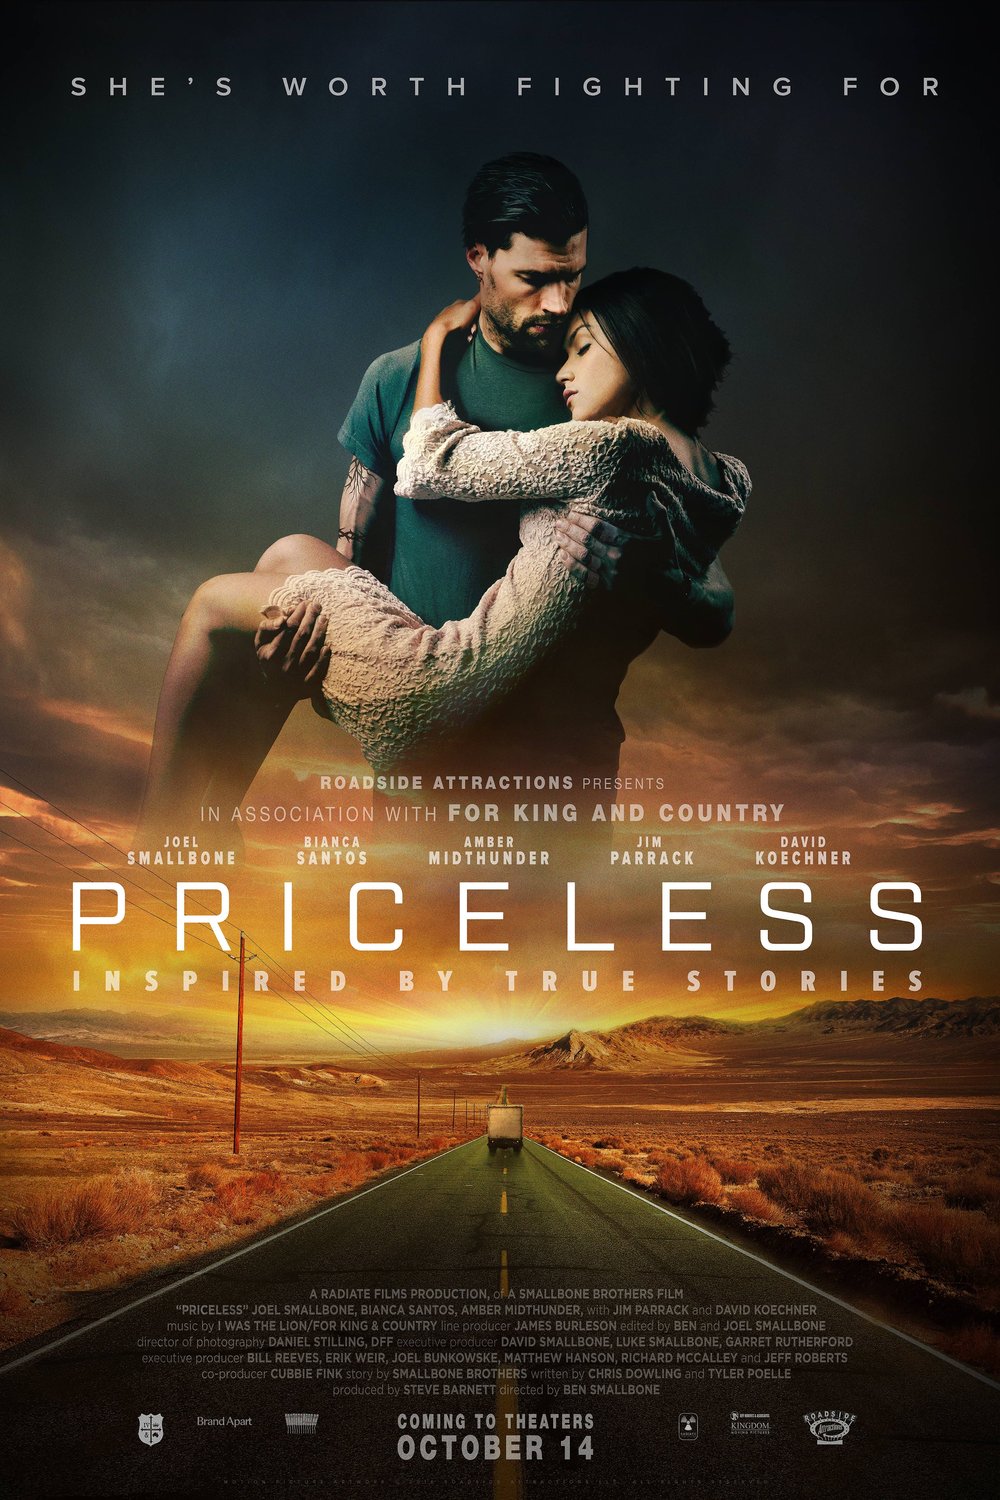 Poster of the movie Priceless